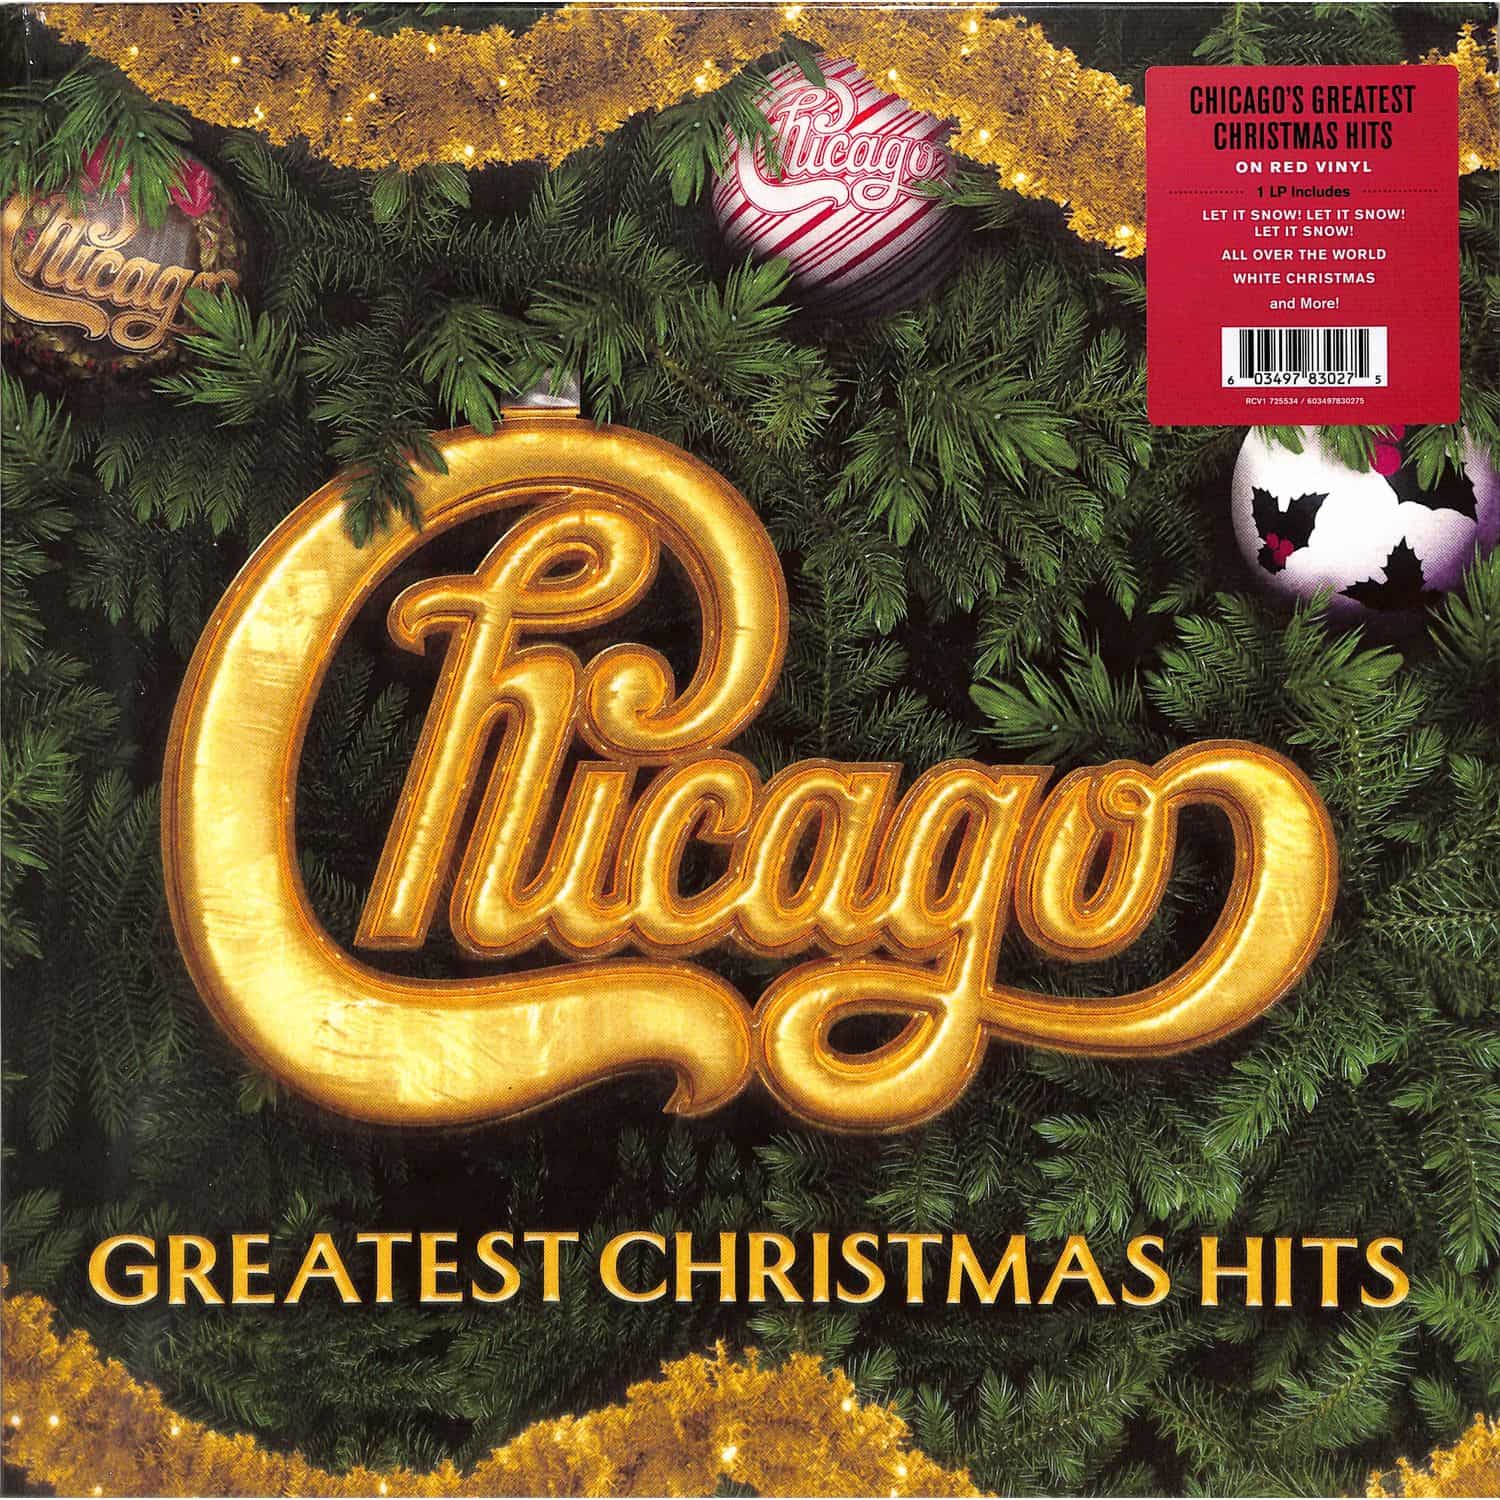 Chicago - GREATEST CHRISTMAS HITS 